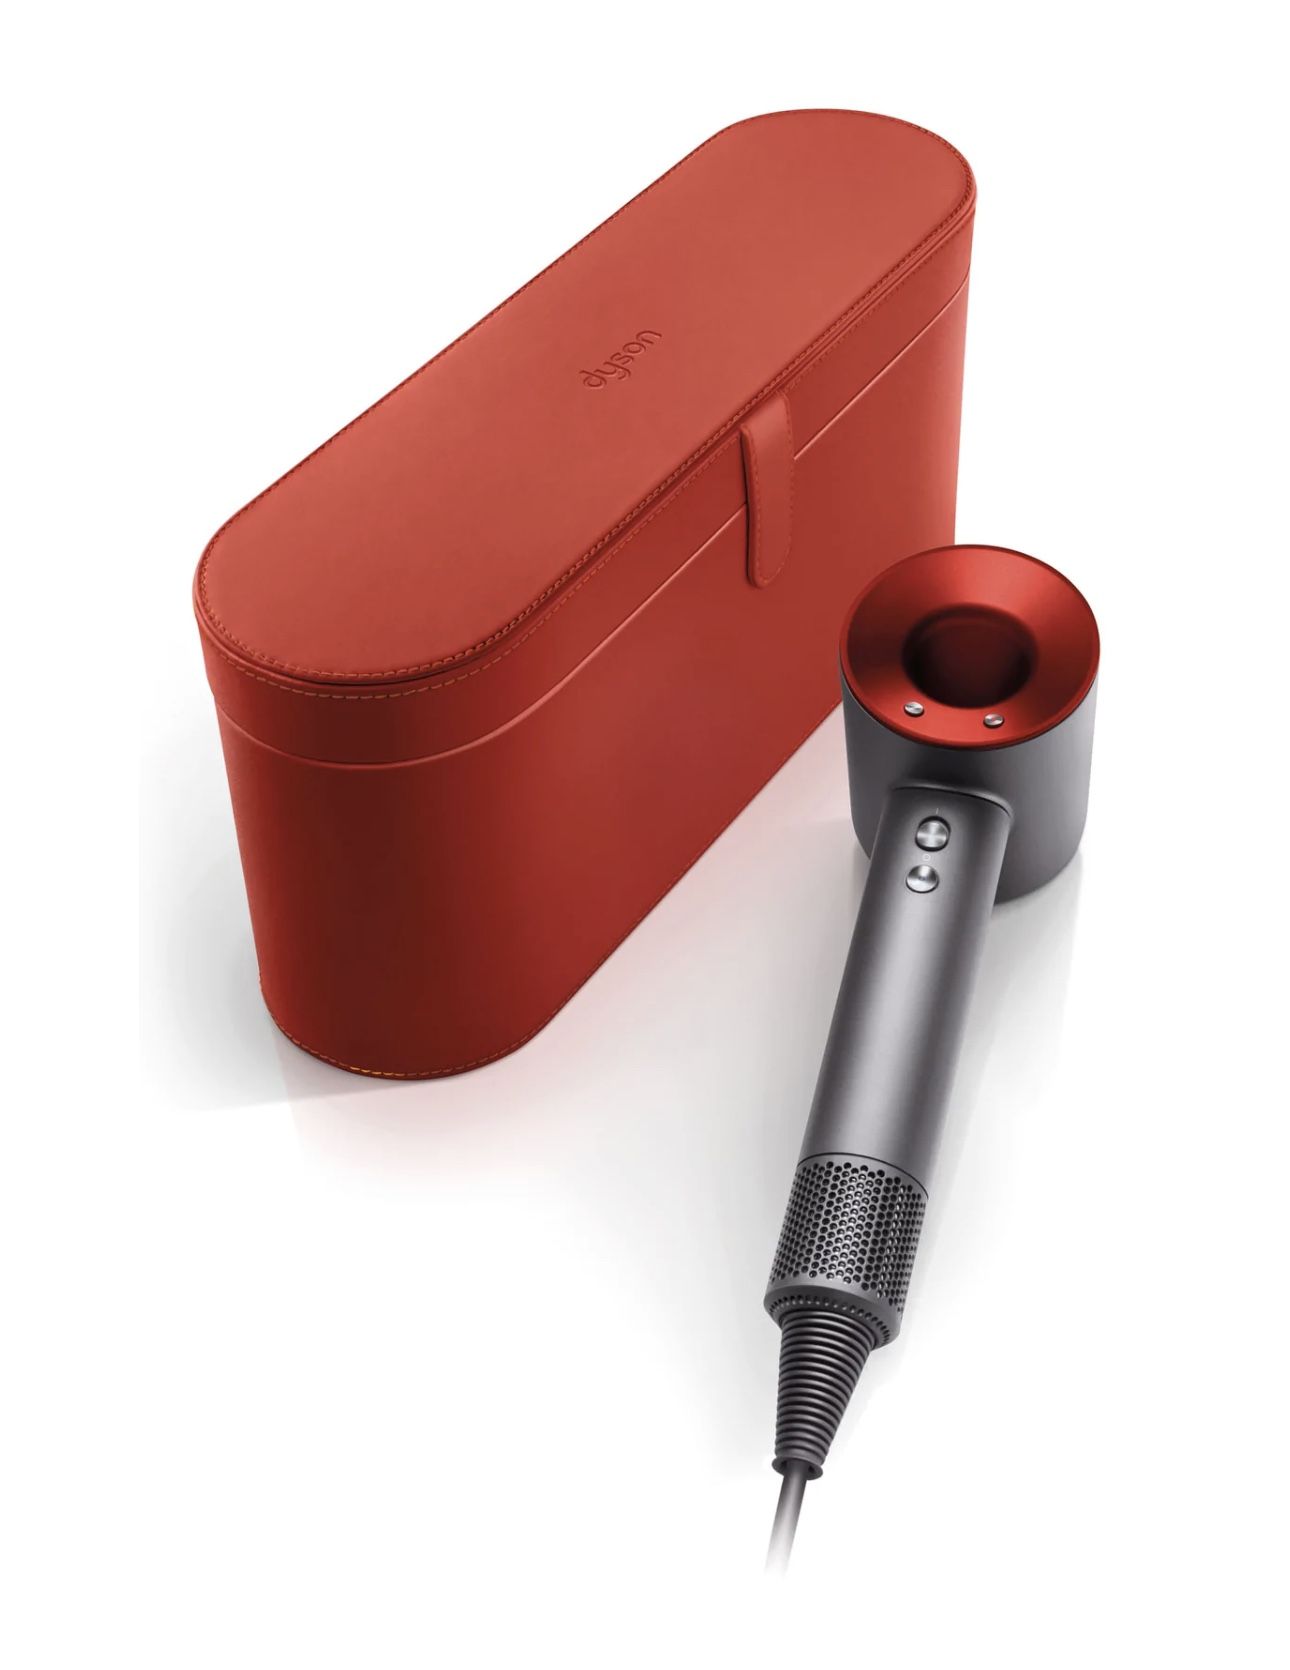 Dyson Supersonic Blow Dryer Red